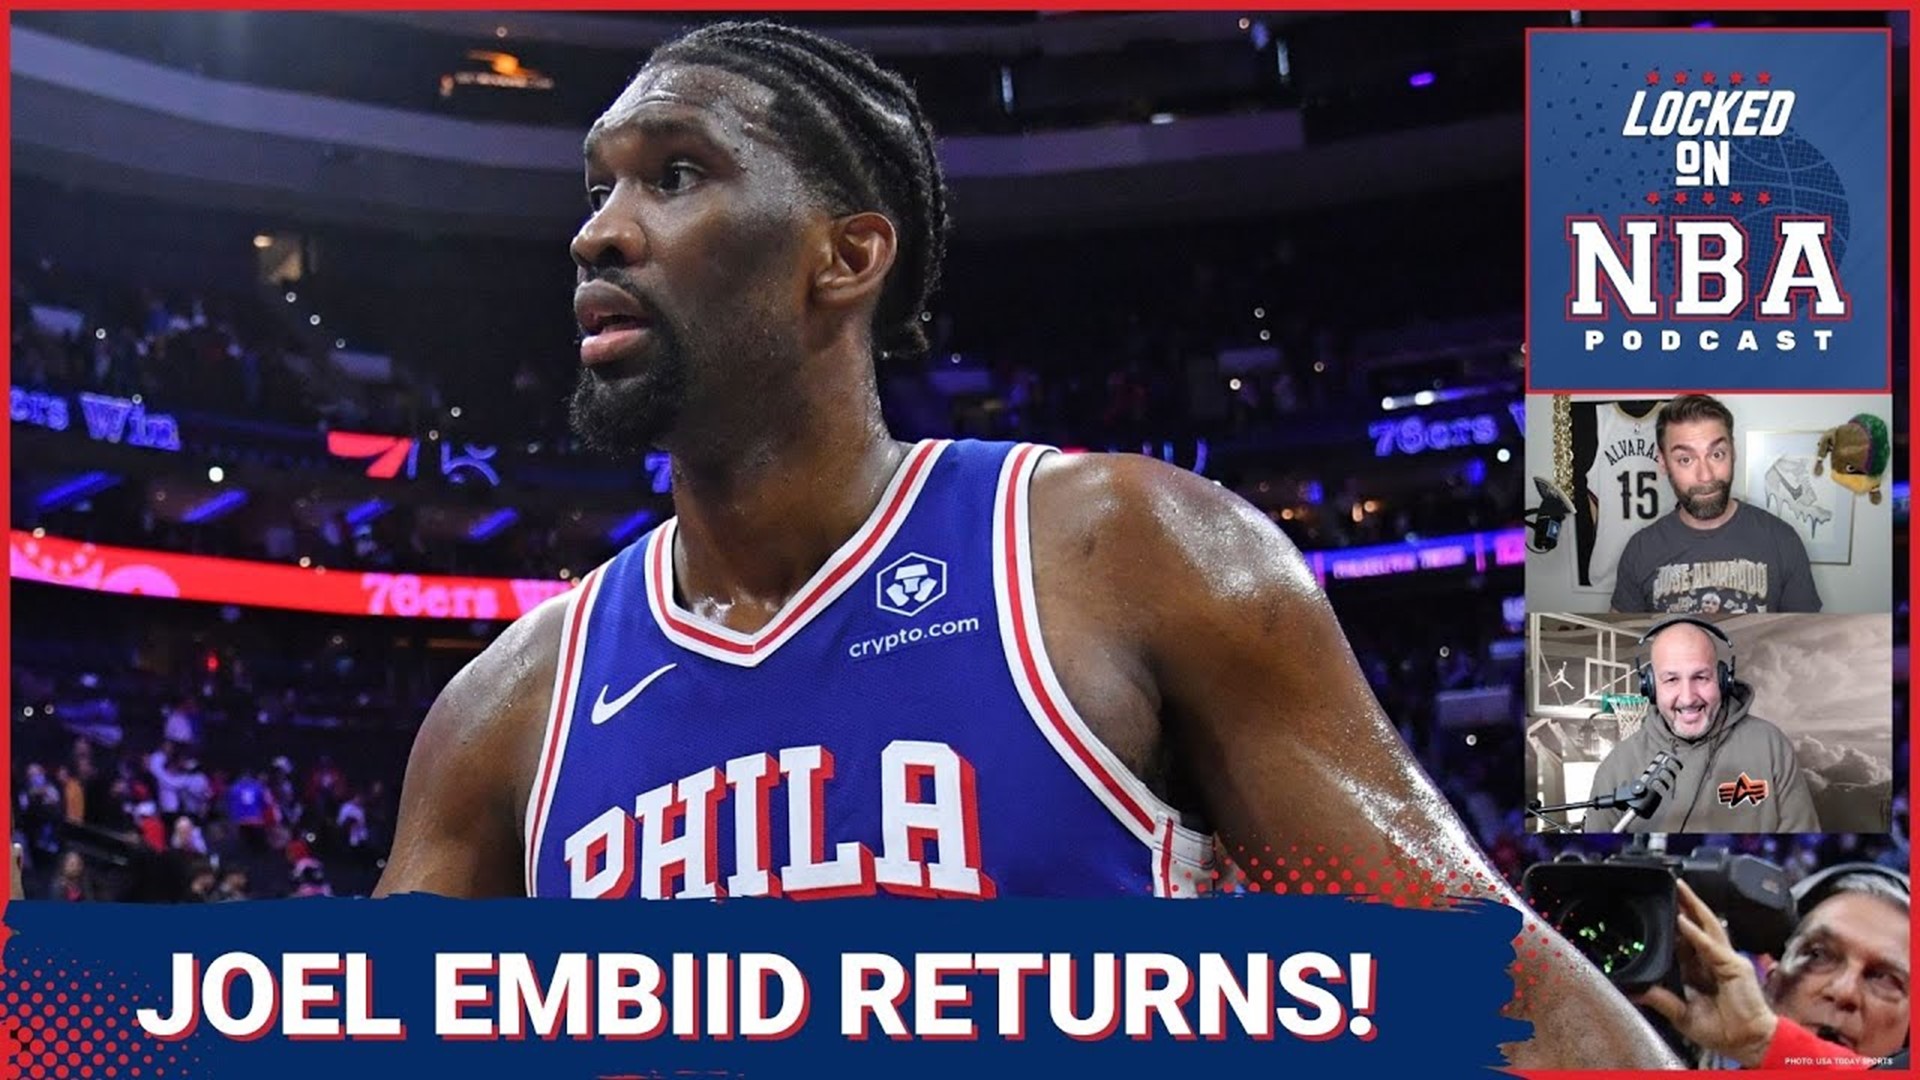 Joel Embiid returned for the Philadelphia 76ers and led his team to a win over the Oklahoma City Thunder.